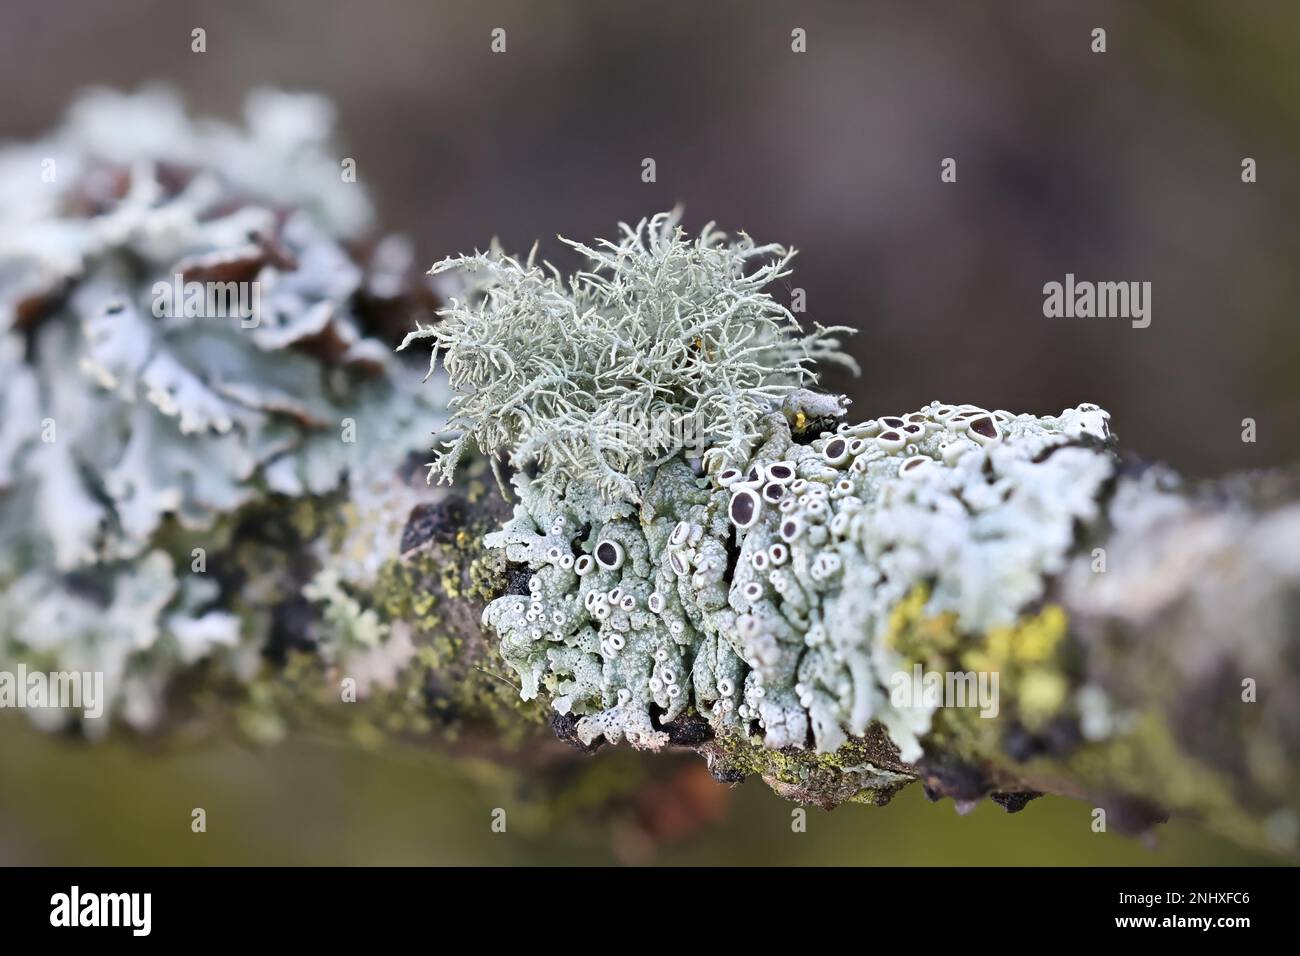 Usnea hirta, known as bristly beard lichen, and various other epiphytic lichens (monk's-hood lichen, hairy rosette lichen) Stock Photo